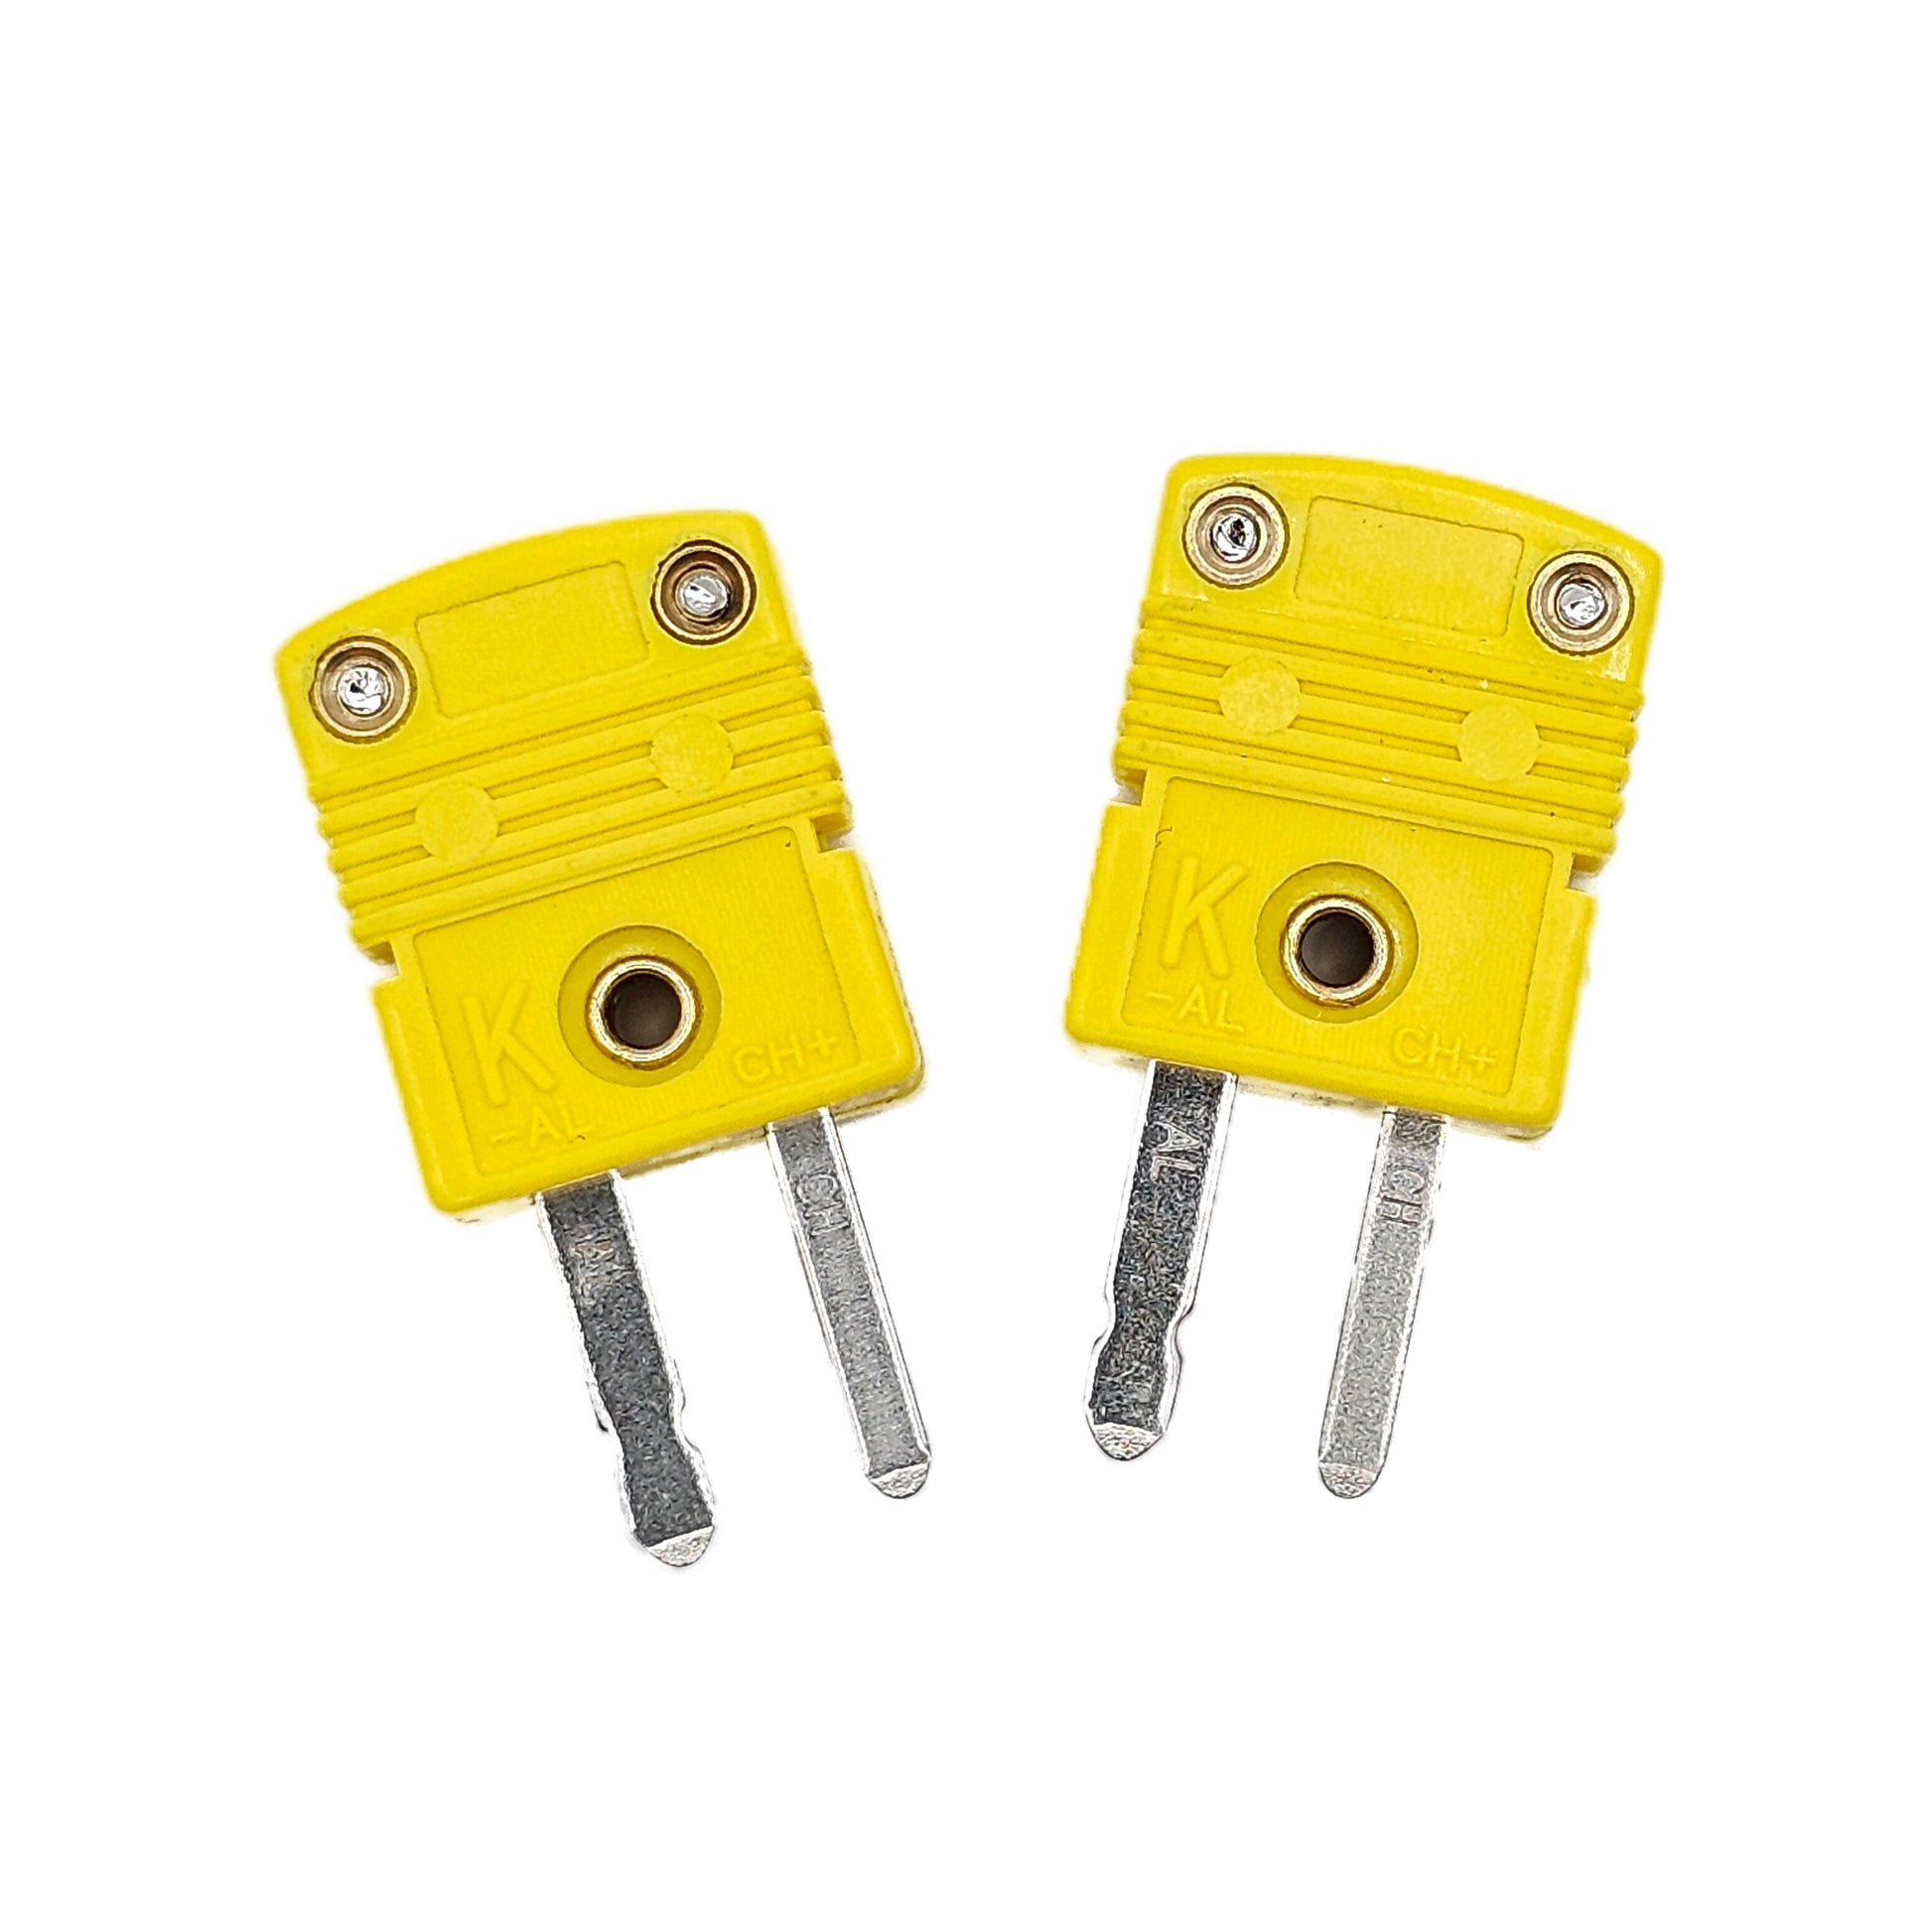 Type-K Miniature Thermocouple Connector Pair